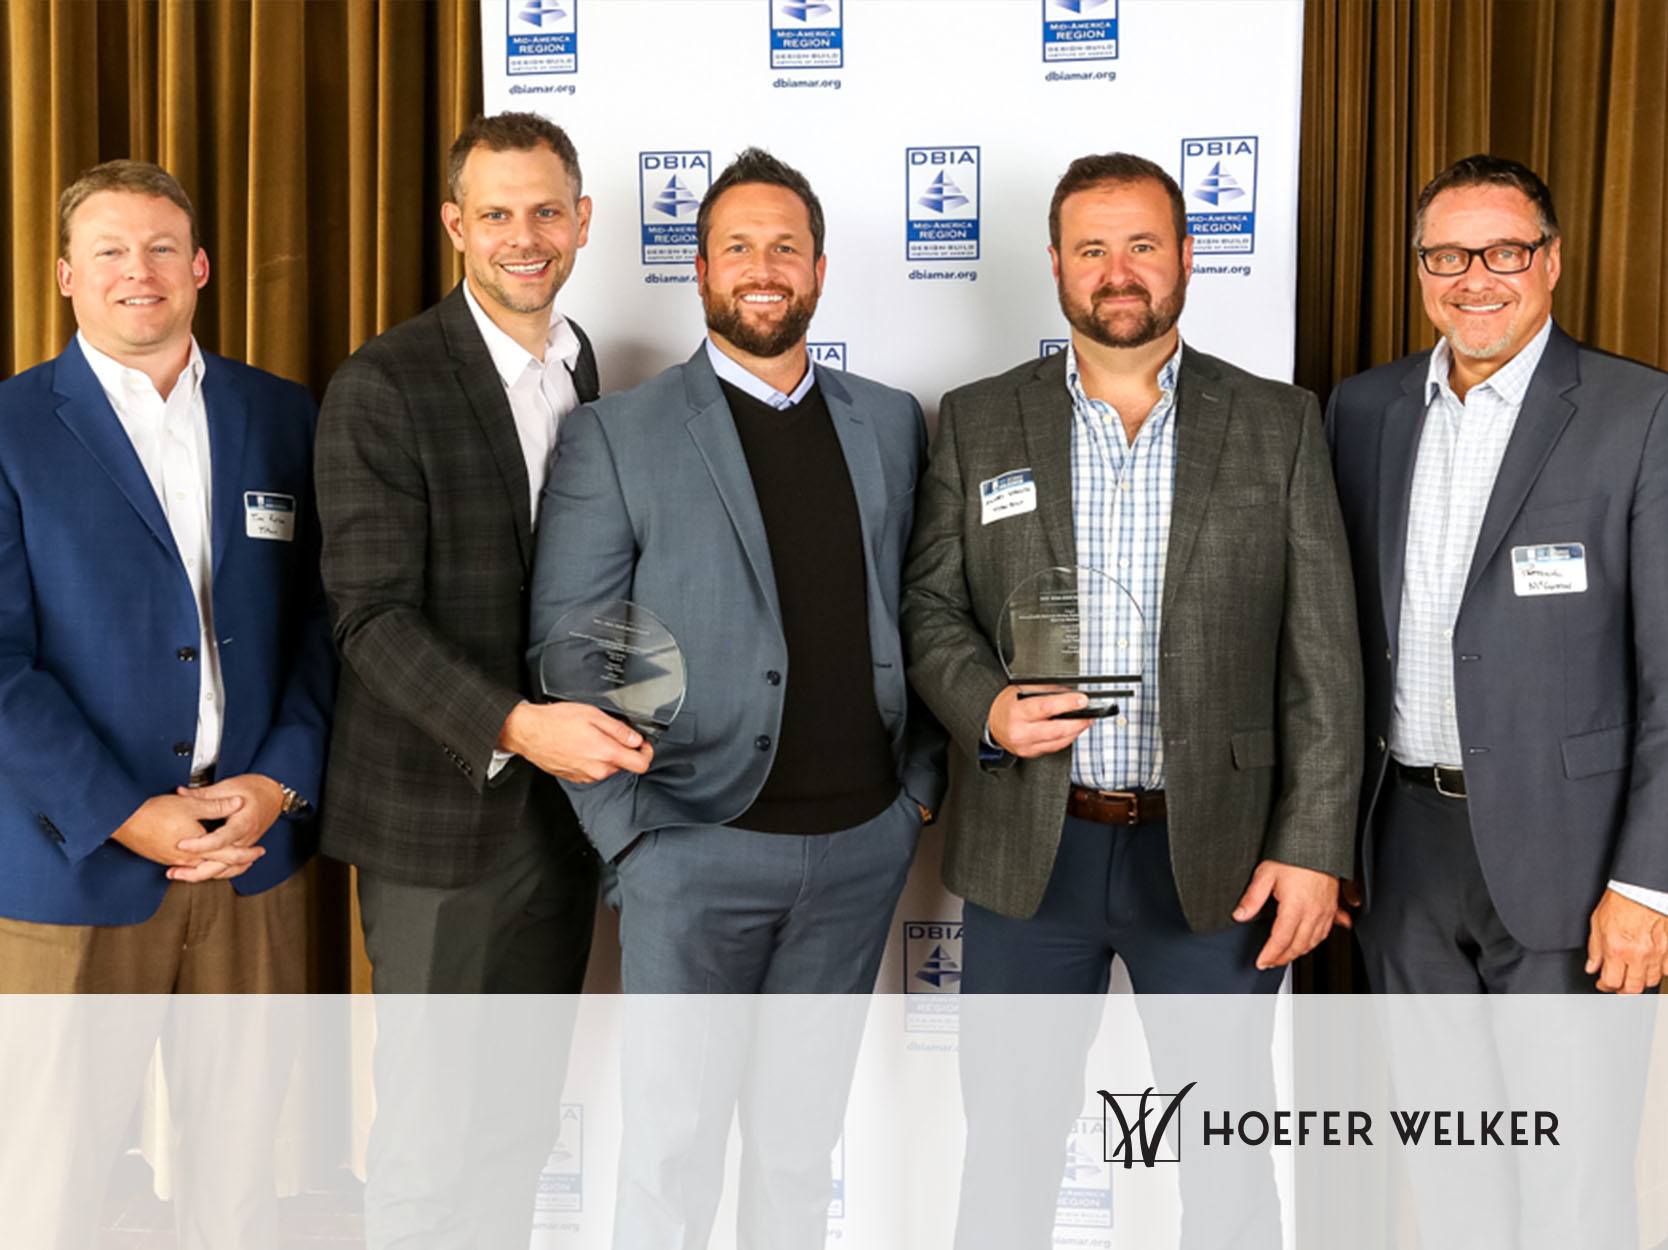 Two Hoefer Welker healthcare facilities receive DBIA-MAR awards